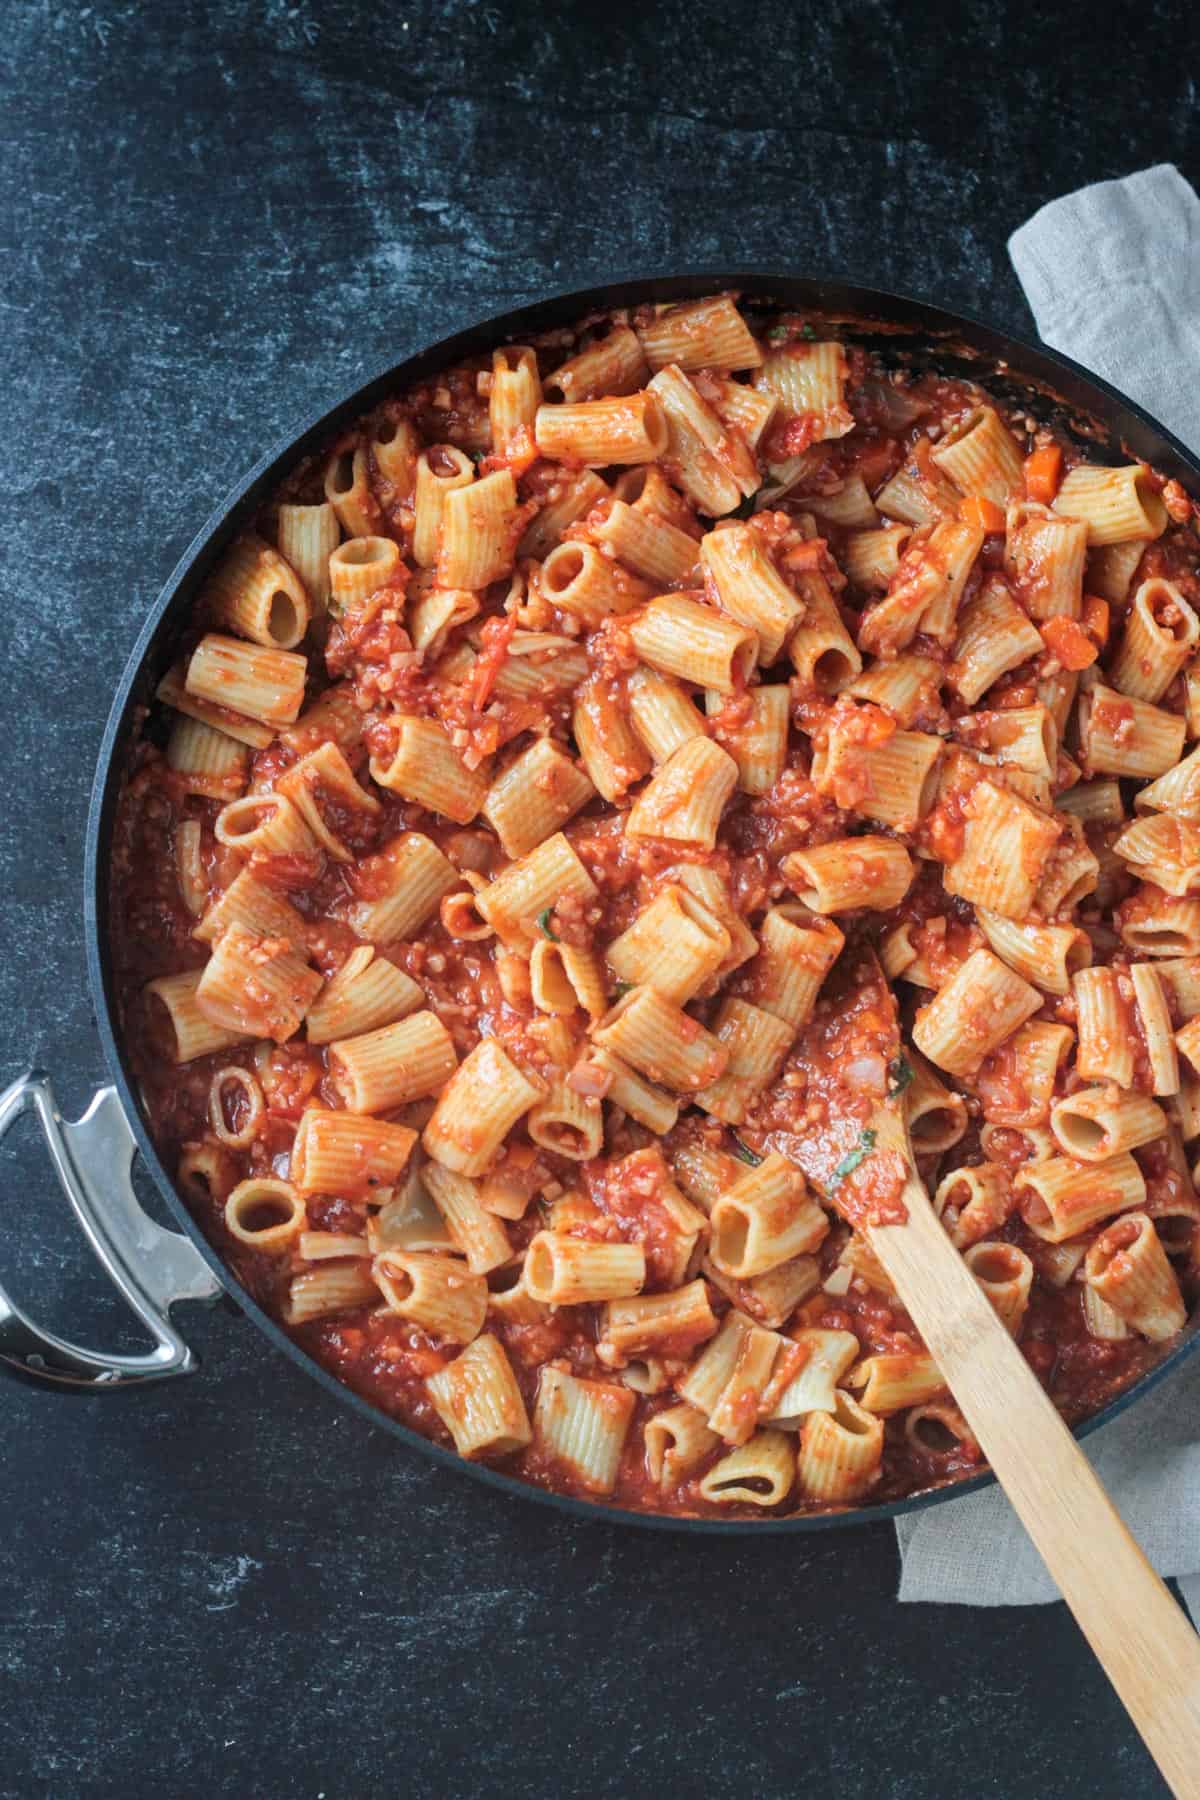 Rigatoni noodles mixed with the sauce.